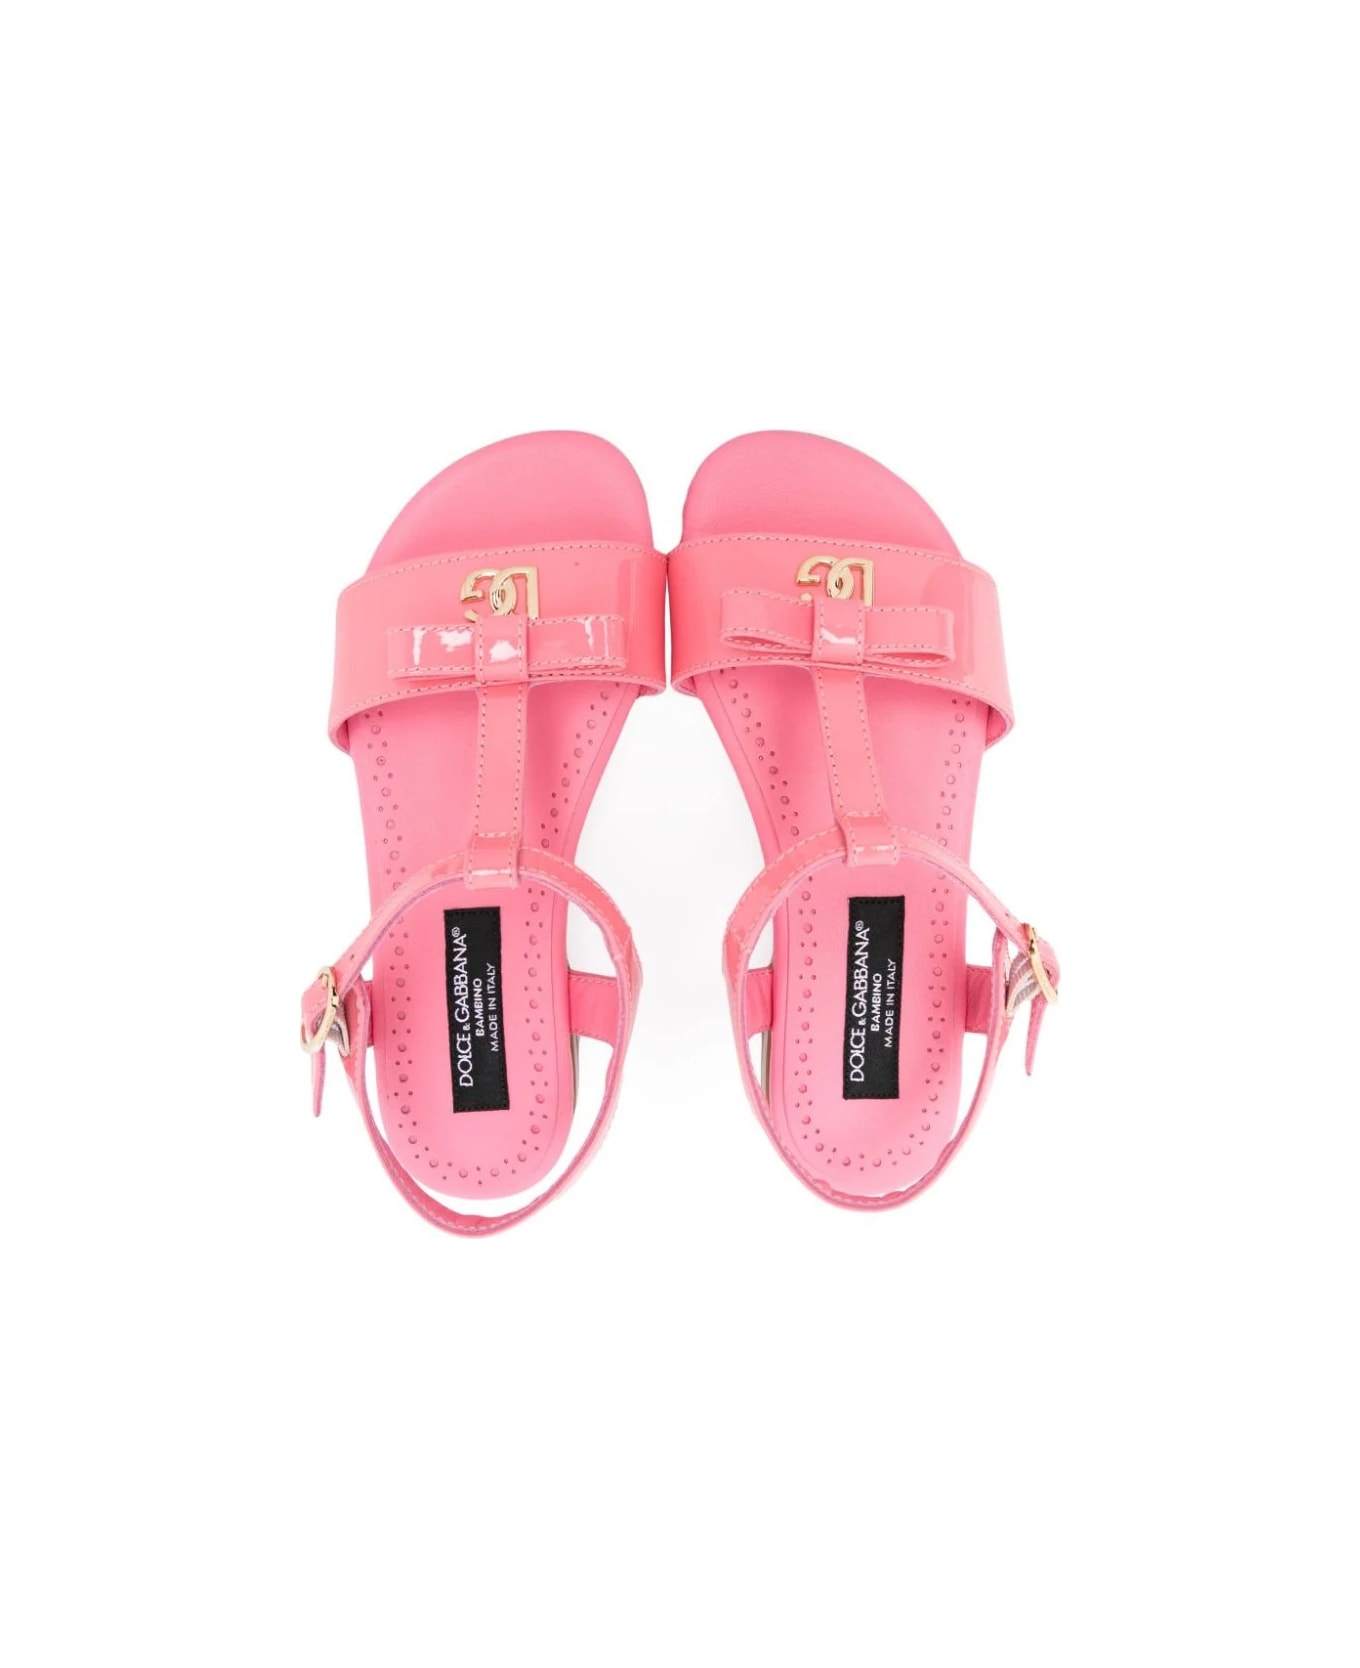 Dolce & Gabbana Blush Pink Patent Leather Sandals With Dg Logo - Pink